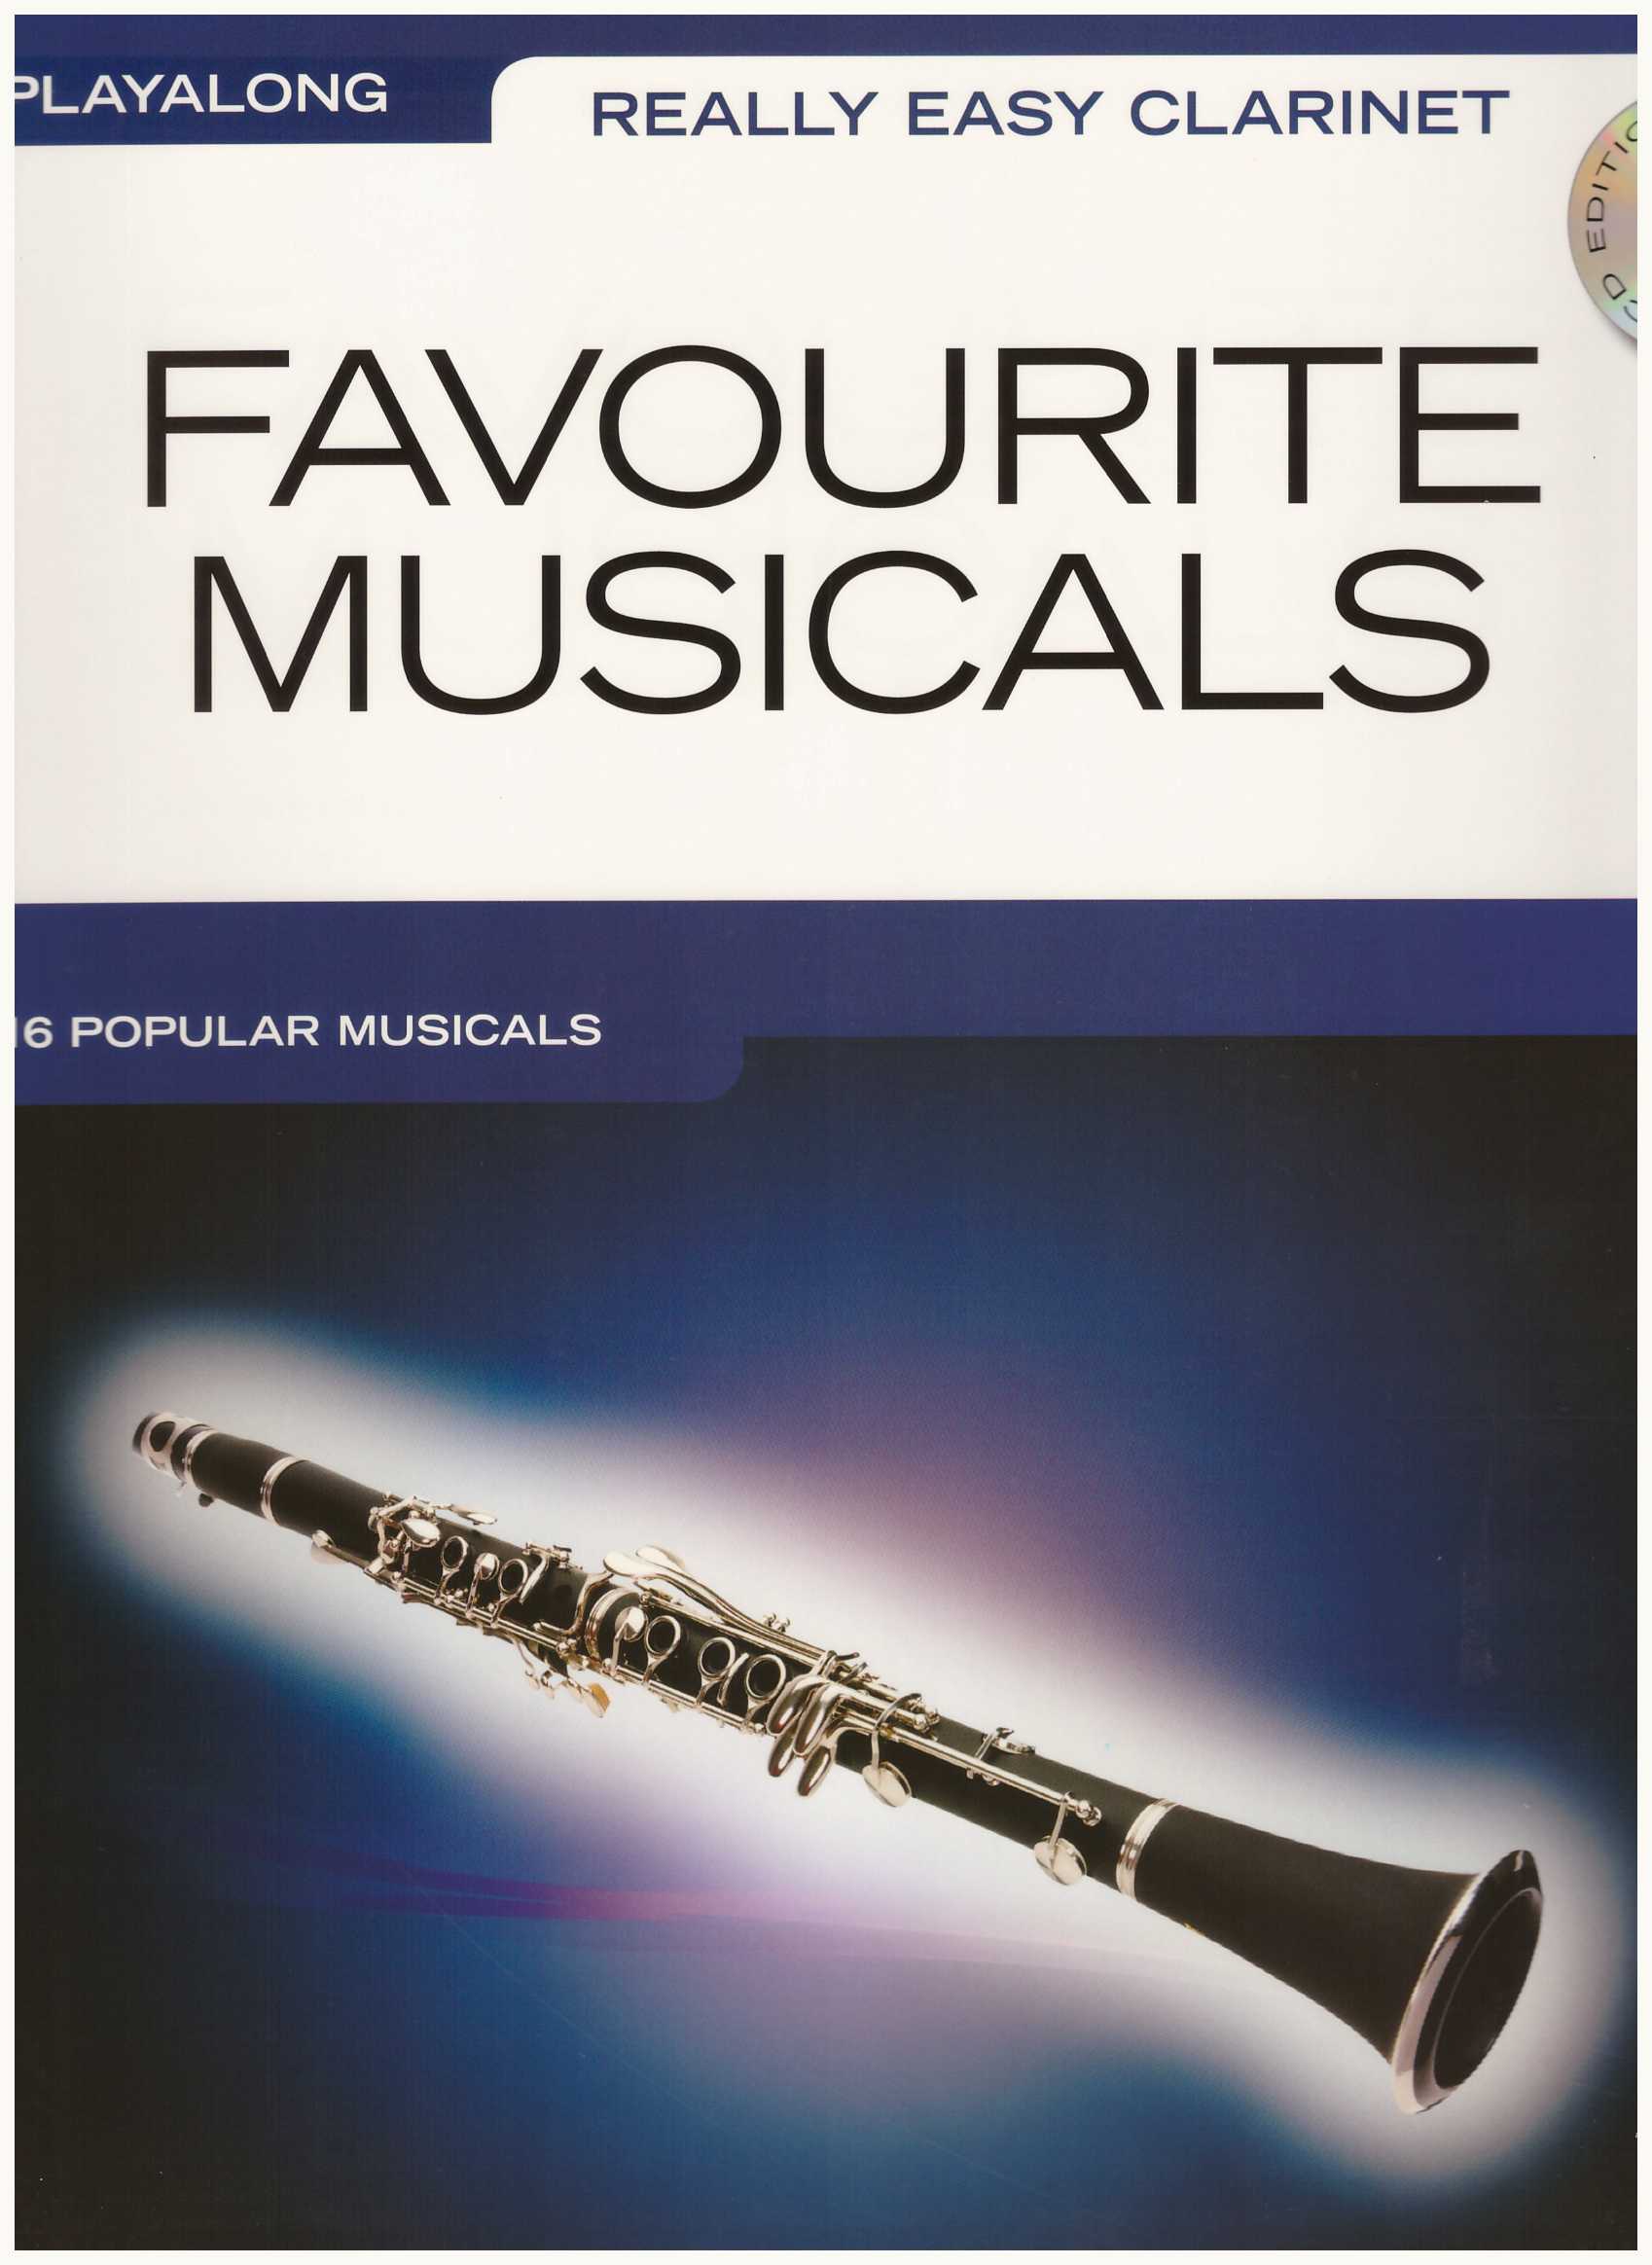 Really Easy Clarinet Favourite Musicals / Clarinet Book / Music Book